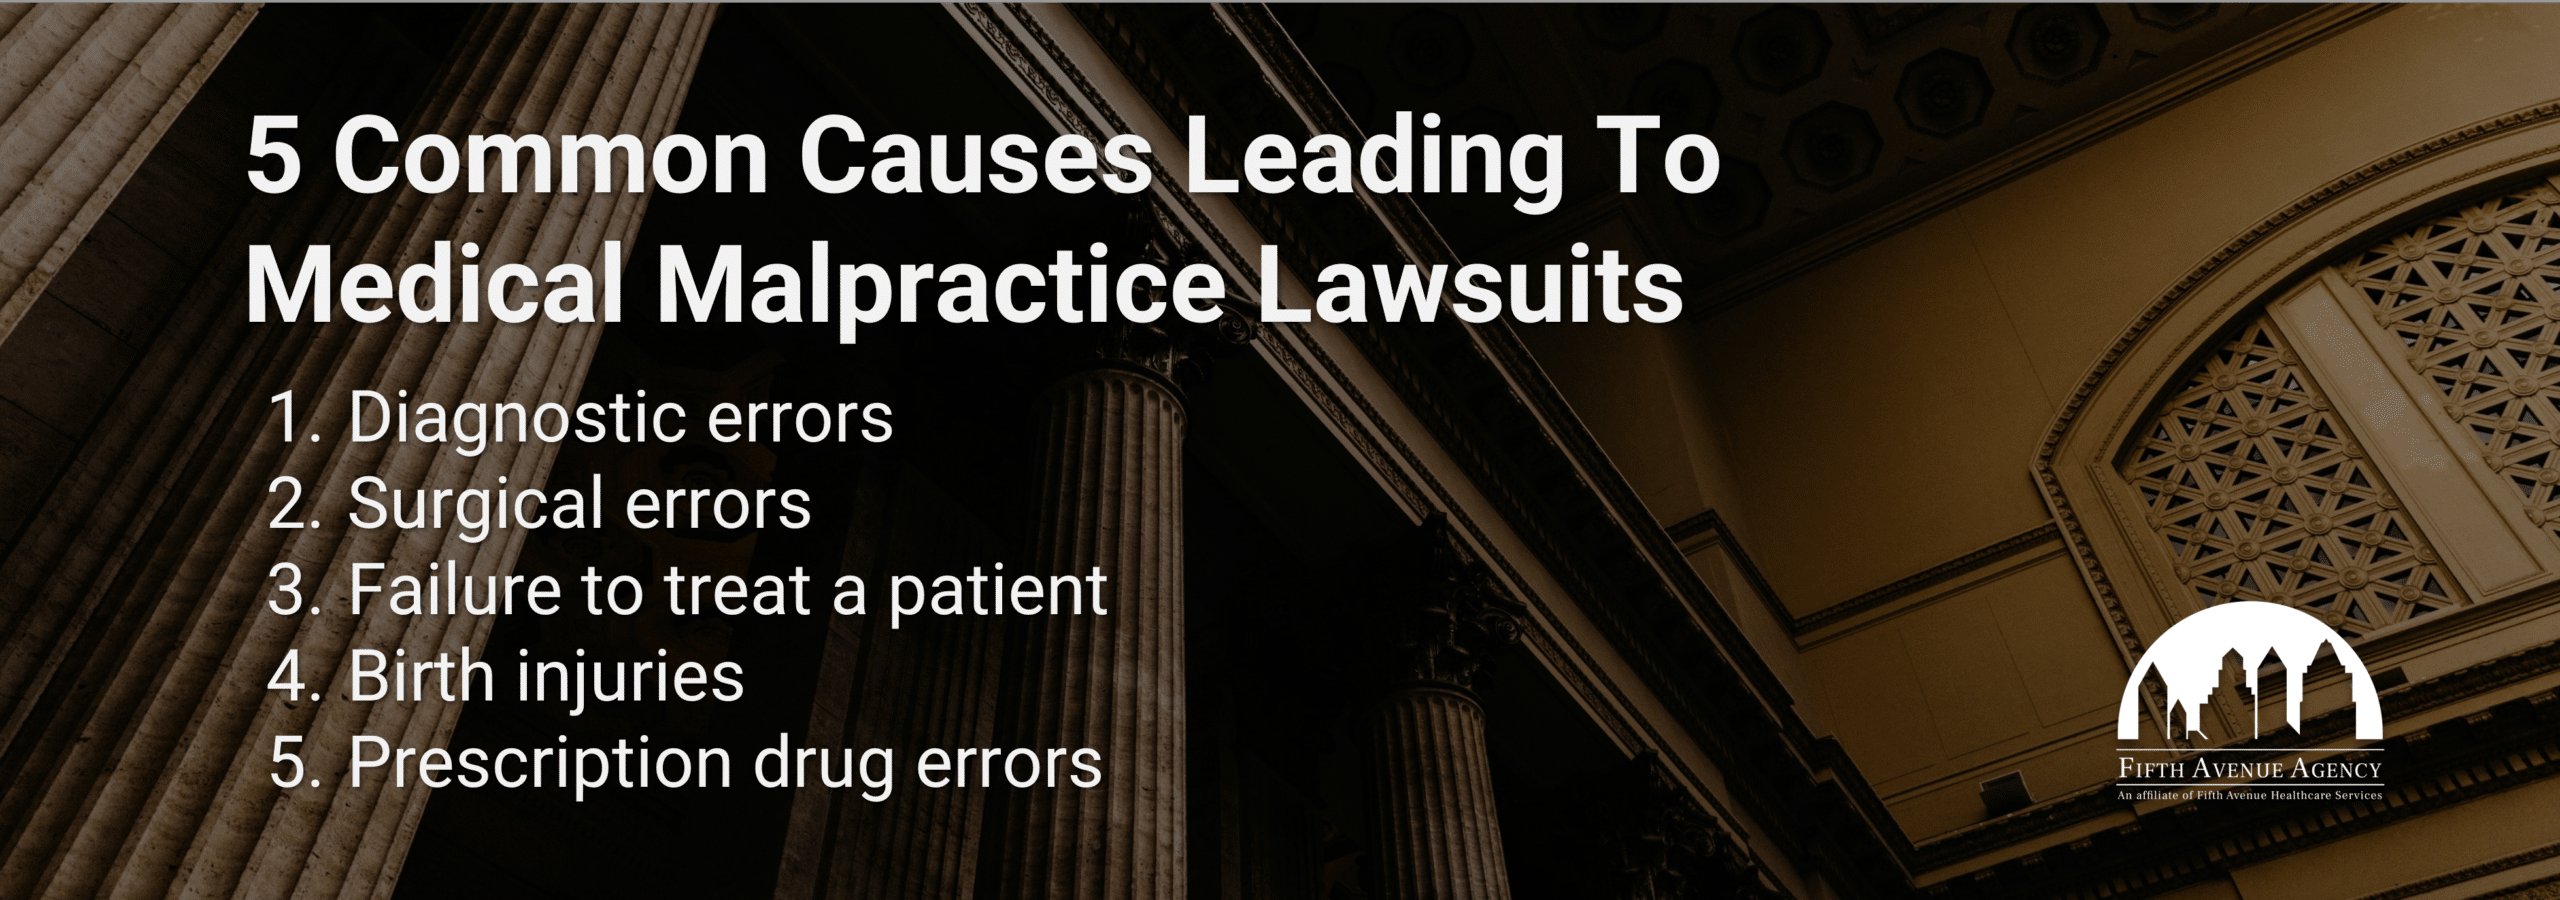 5 Common Causes Leading To Medical Malpractice Lawsuits